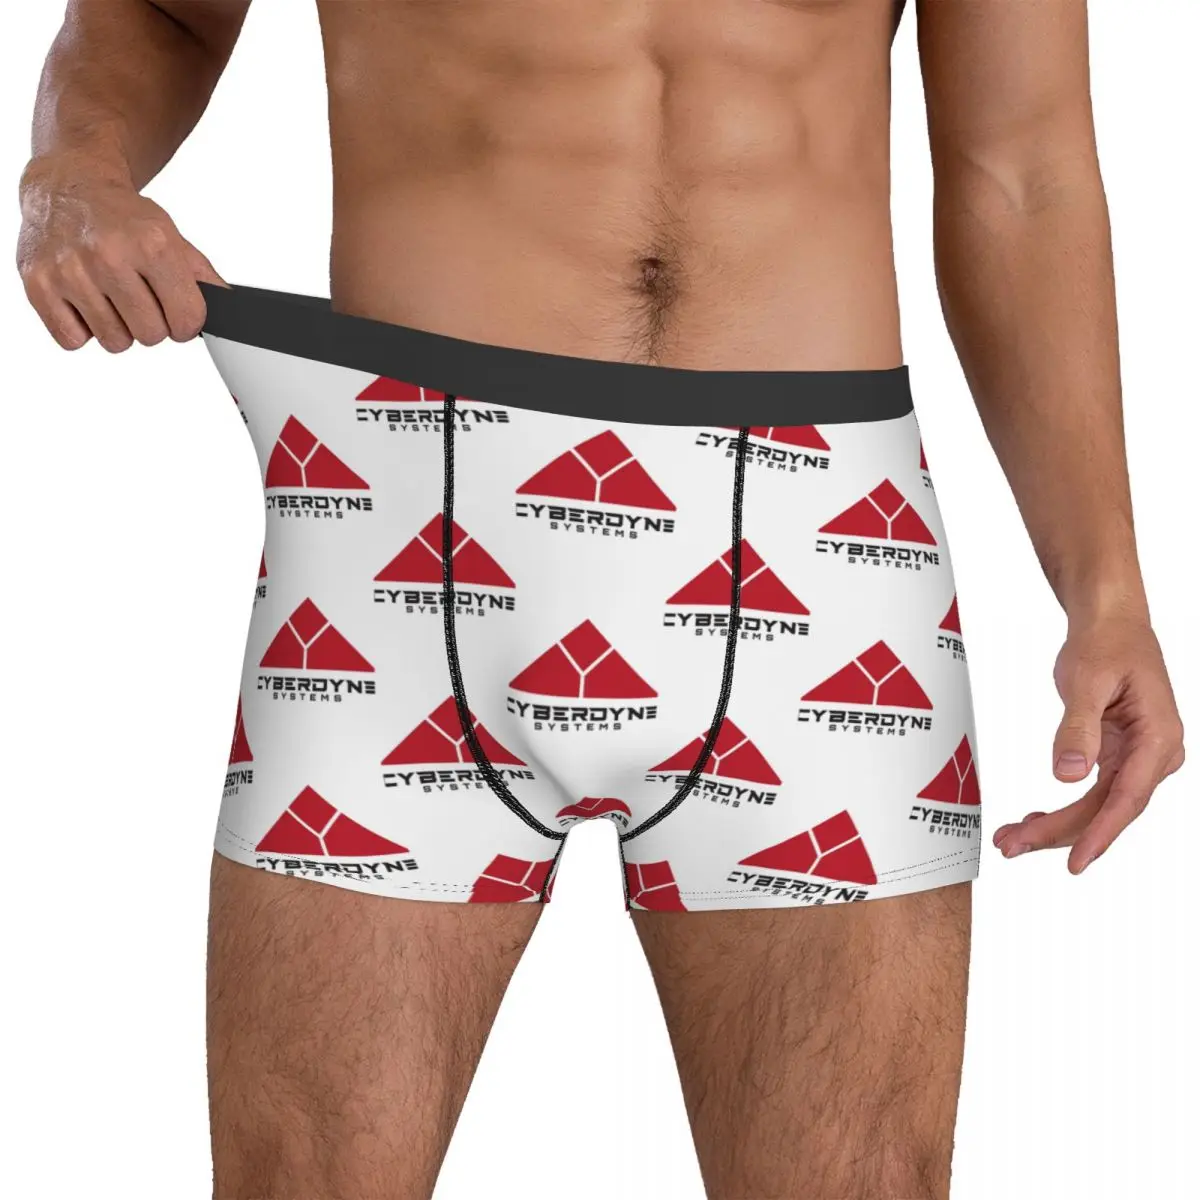 The Terminator T-800 Underwear cyberdyne systems skynet Man Underpants Printing Sexy Boxershorts High Quality Boxer Brief Gift